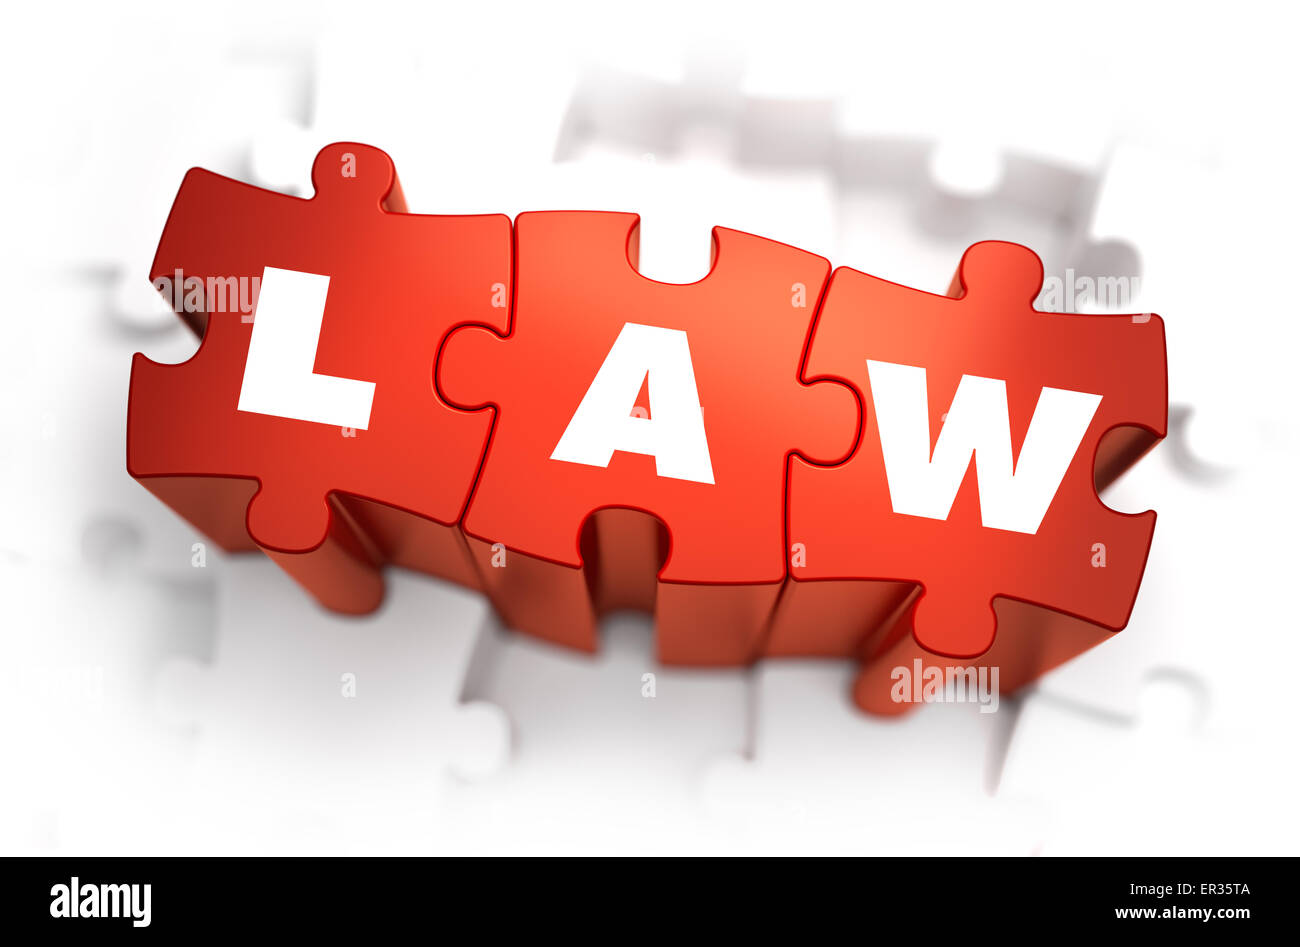 Law - Text on Red Puzzles with White Background. Stock Photo